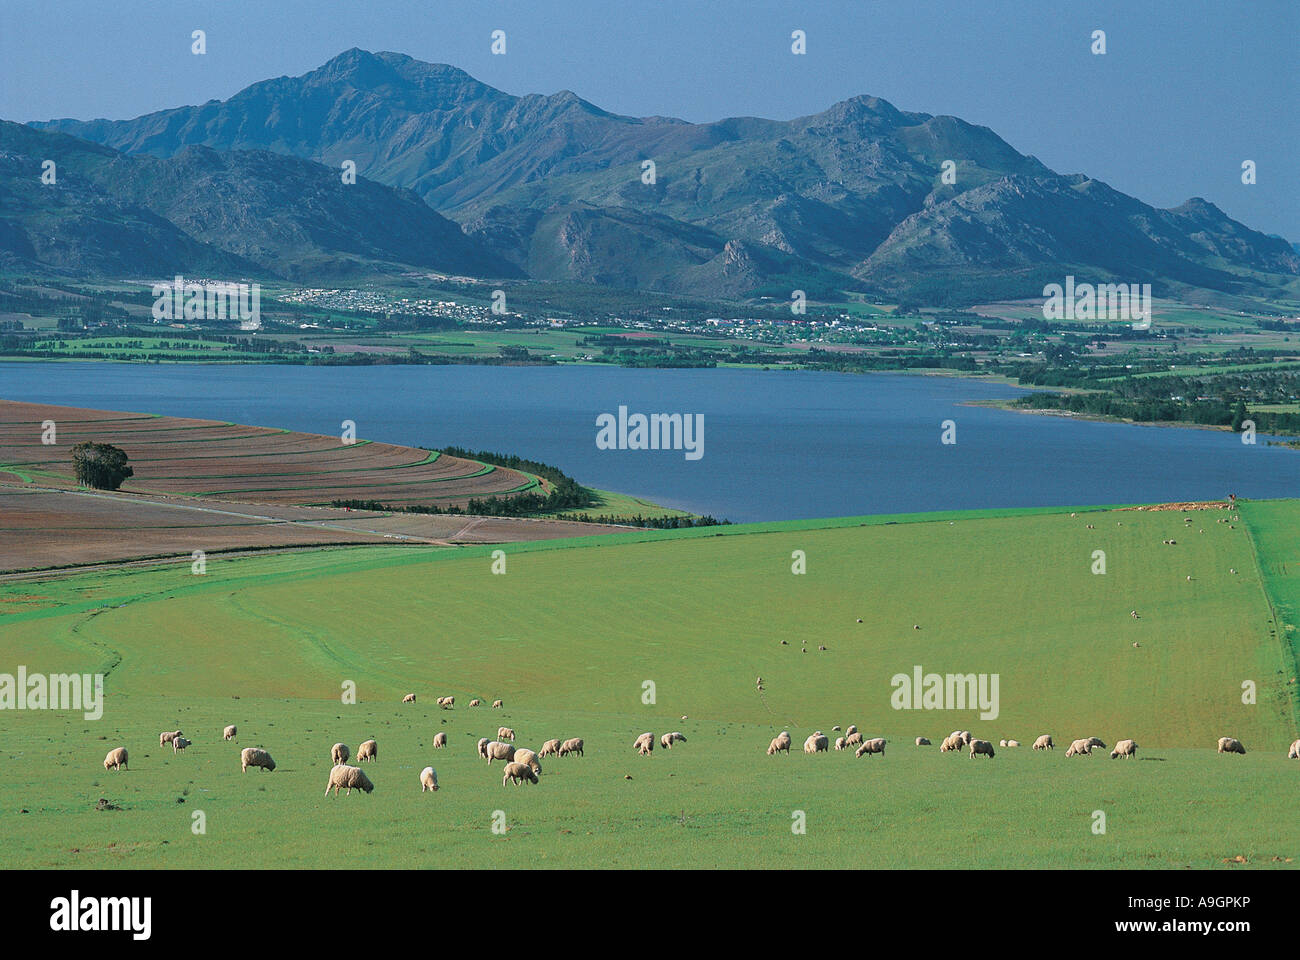 Sheep grazing and Wheat fields Villiersdorp Theewaterskloof Dam West Cape South Africa Stock Photo